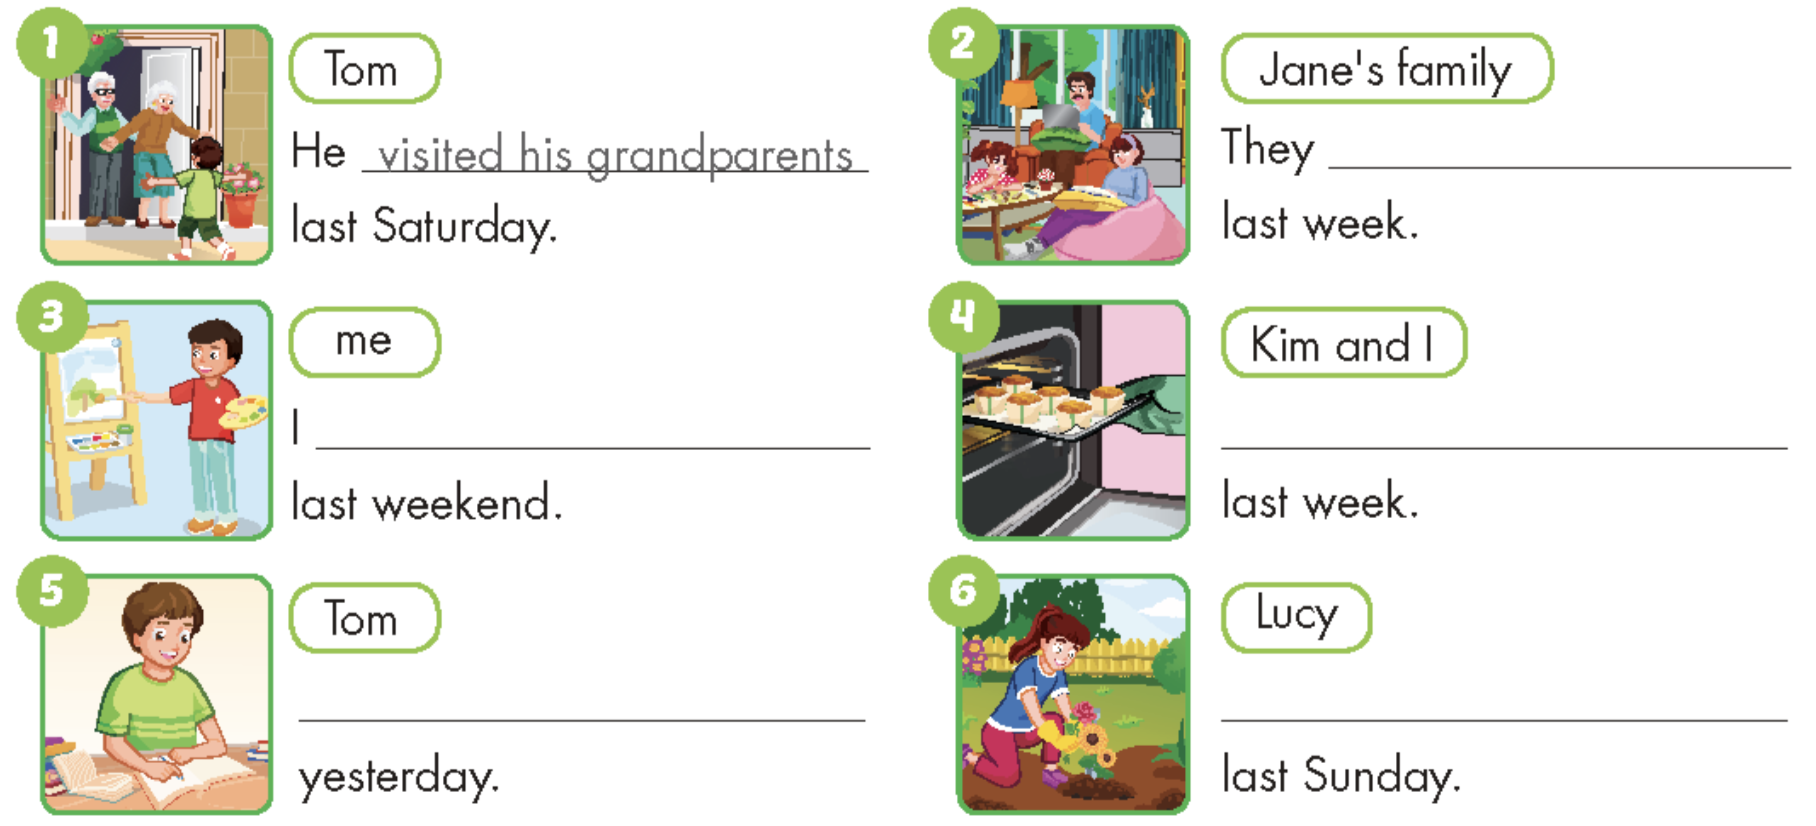 Tiếng Anh lớp 5 Unit 3: My friends and I - ilearn Smart Start (ảnh 23)